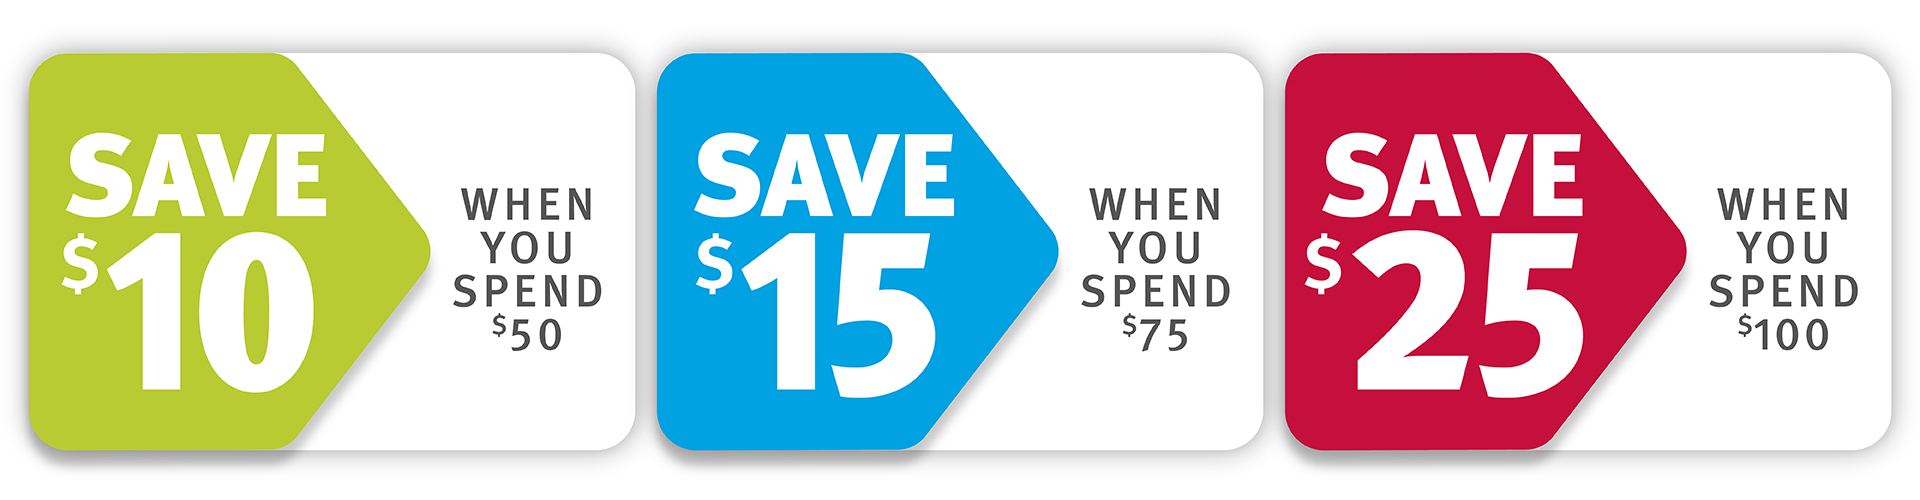 3 tiered spend and save promotion. First tier is to save $10 when you spend $50. Second tier is save $15 when you spend $75 and third tier is save $25 when you spend $100.